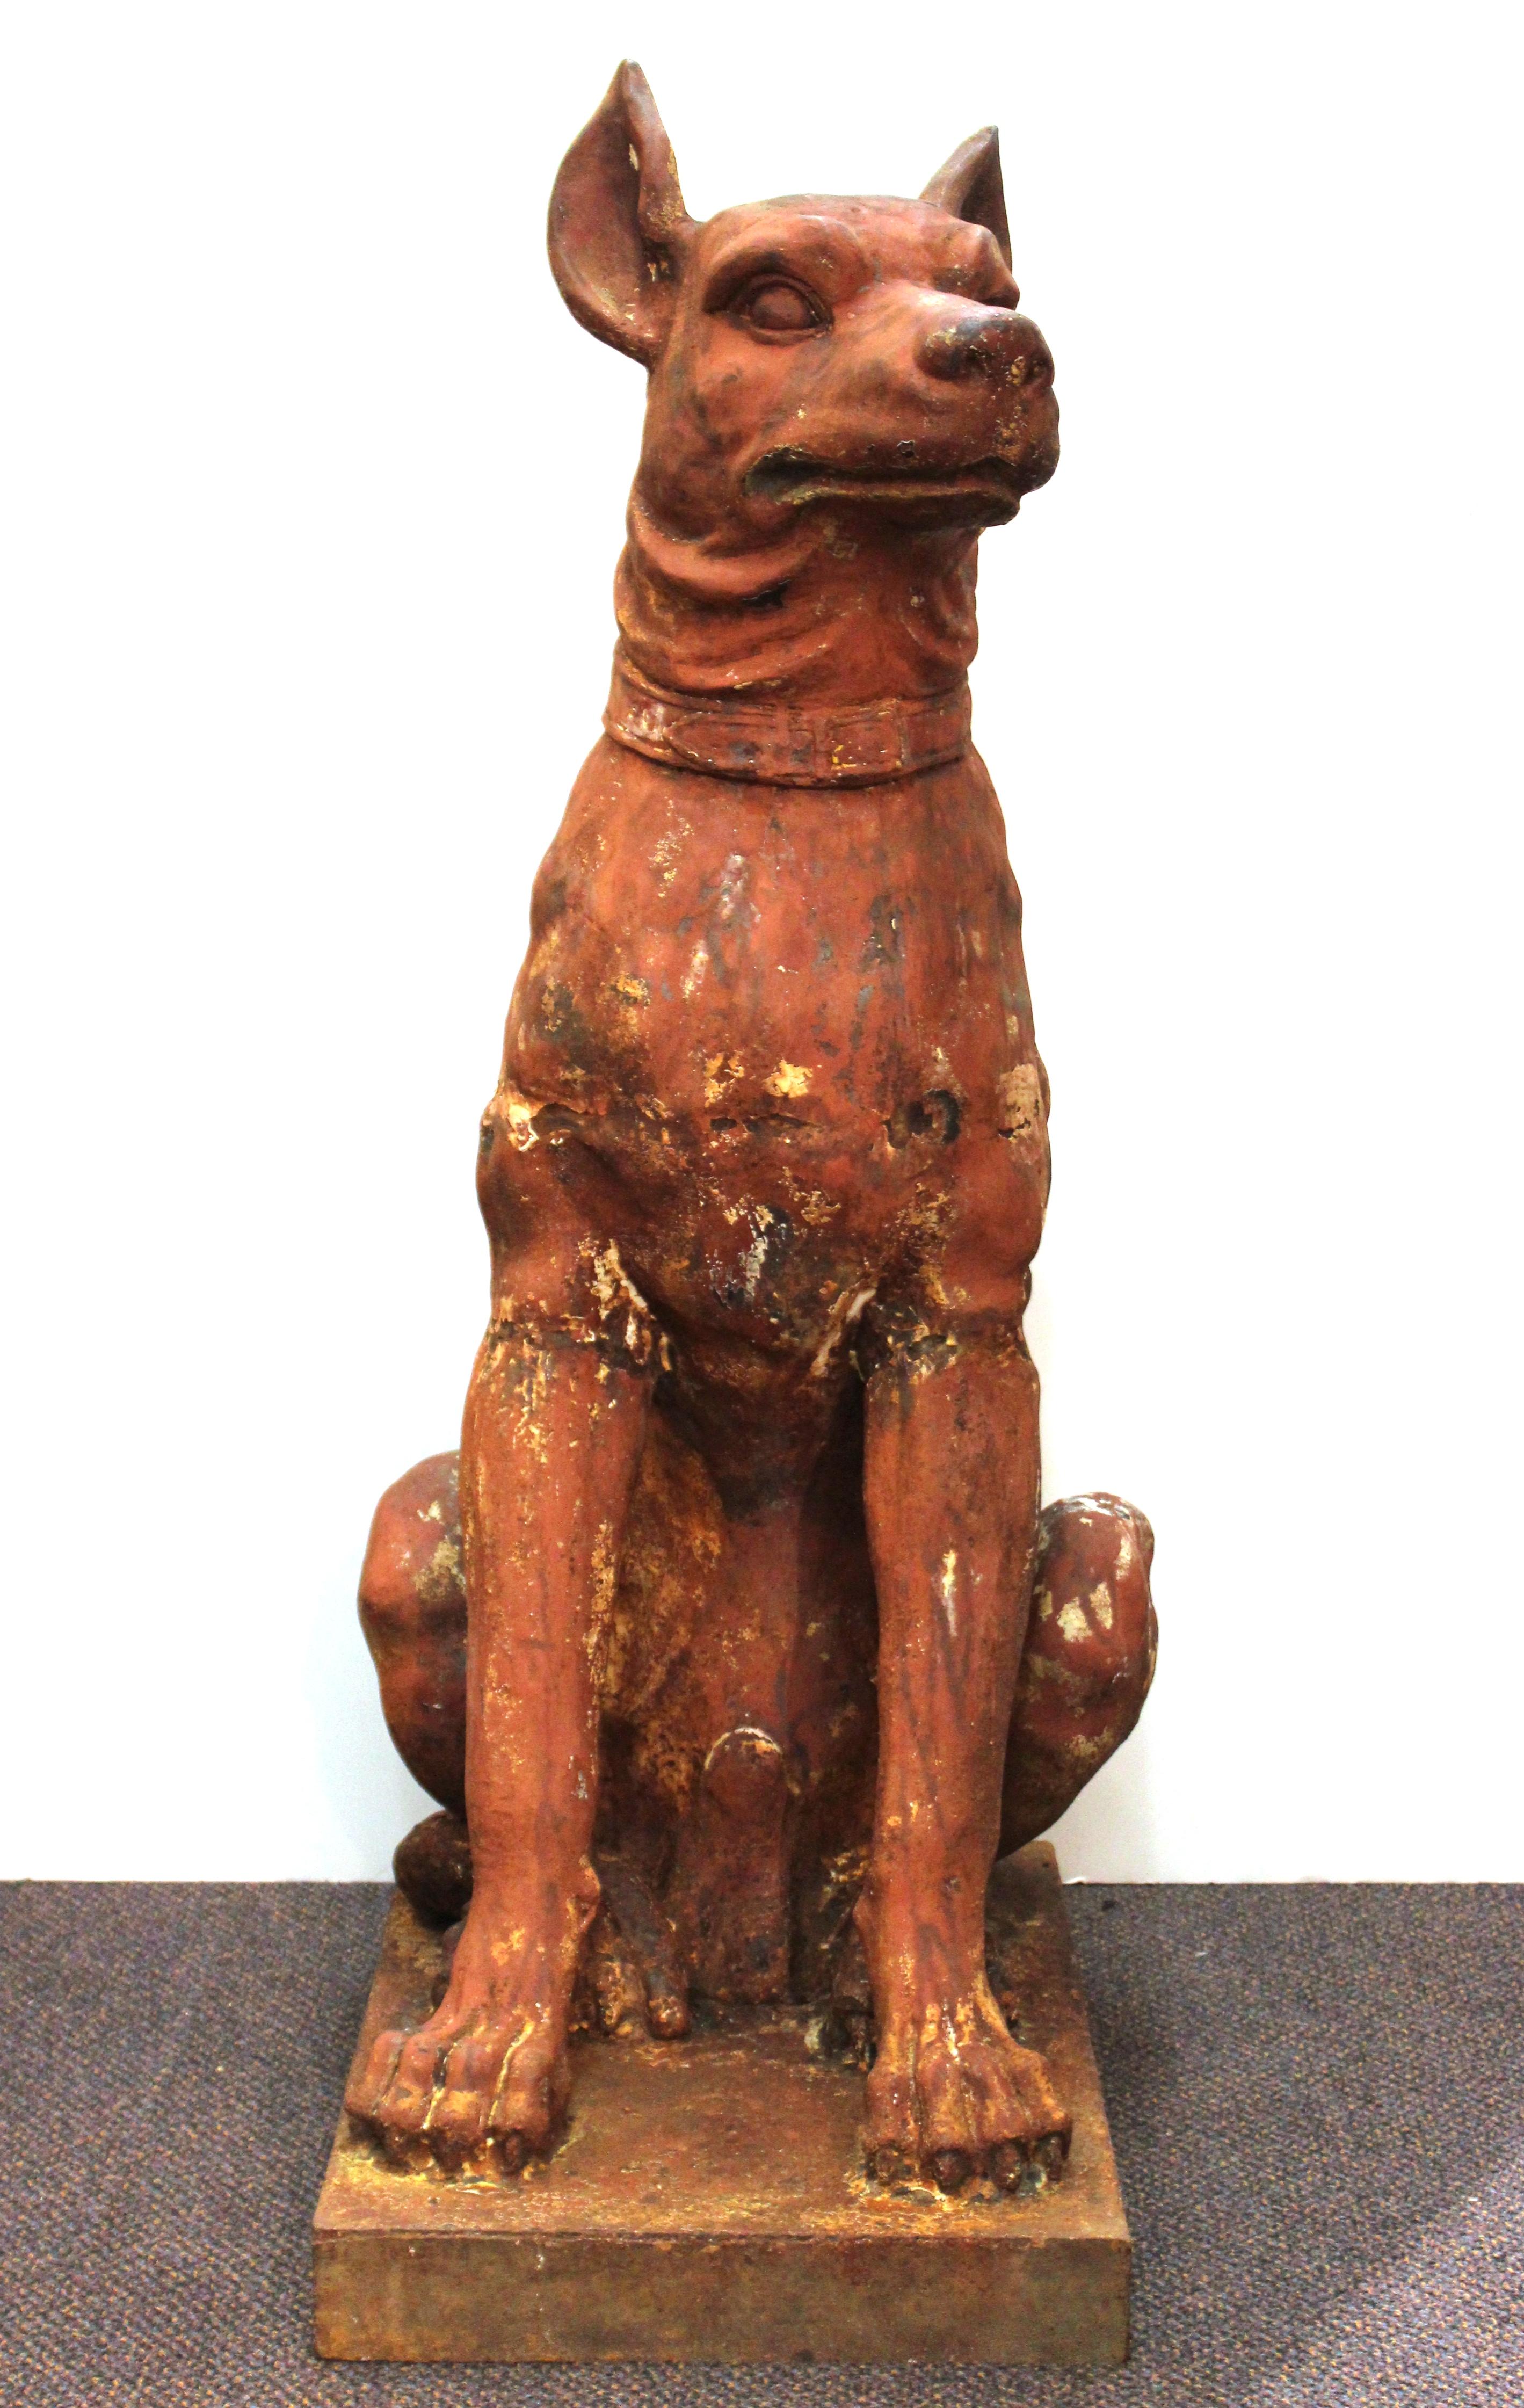 French 19th century pair of beauceron guard dog statues cast in iron, with their original terracotta paint. Frequently used as outdoor garden ornaments or flanking entrance gates. The pair is in great vintage condition, with original weathered